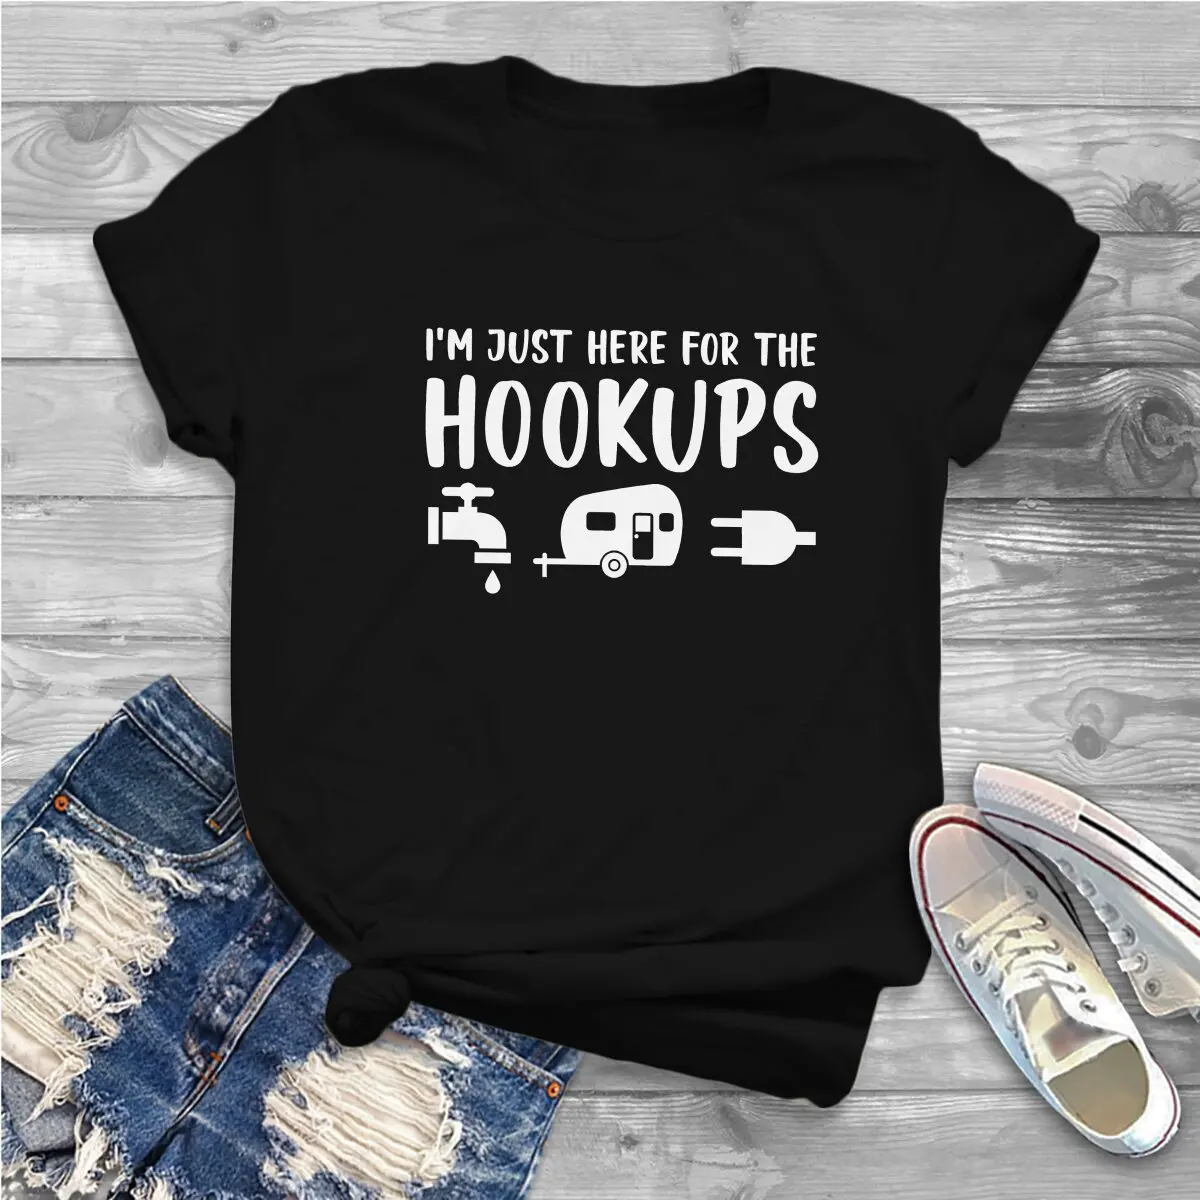 Camp I'm Just Here For The Hookups T Shirt Punk Women's Tees Summer  Harajuku O-Neck Polyester TShirt